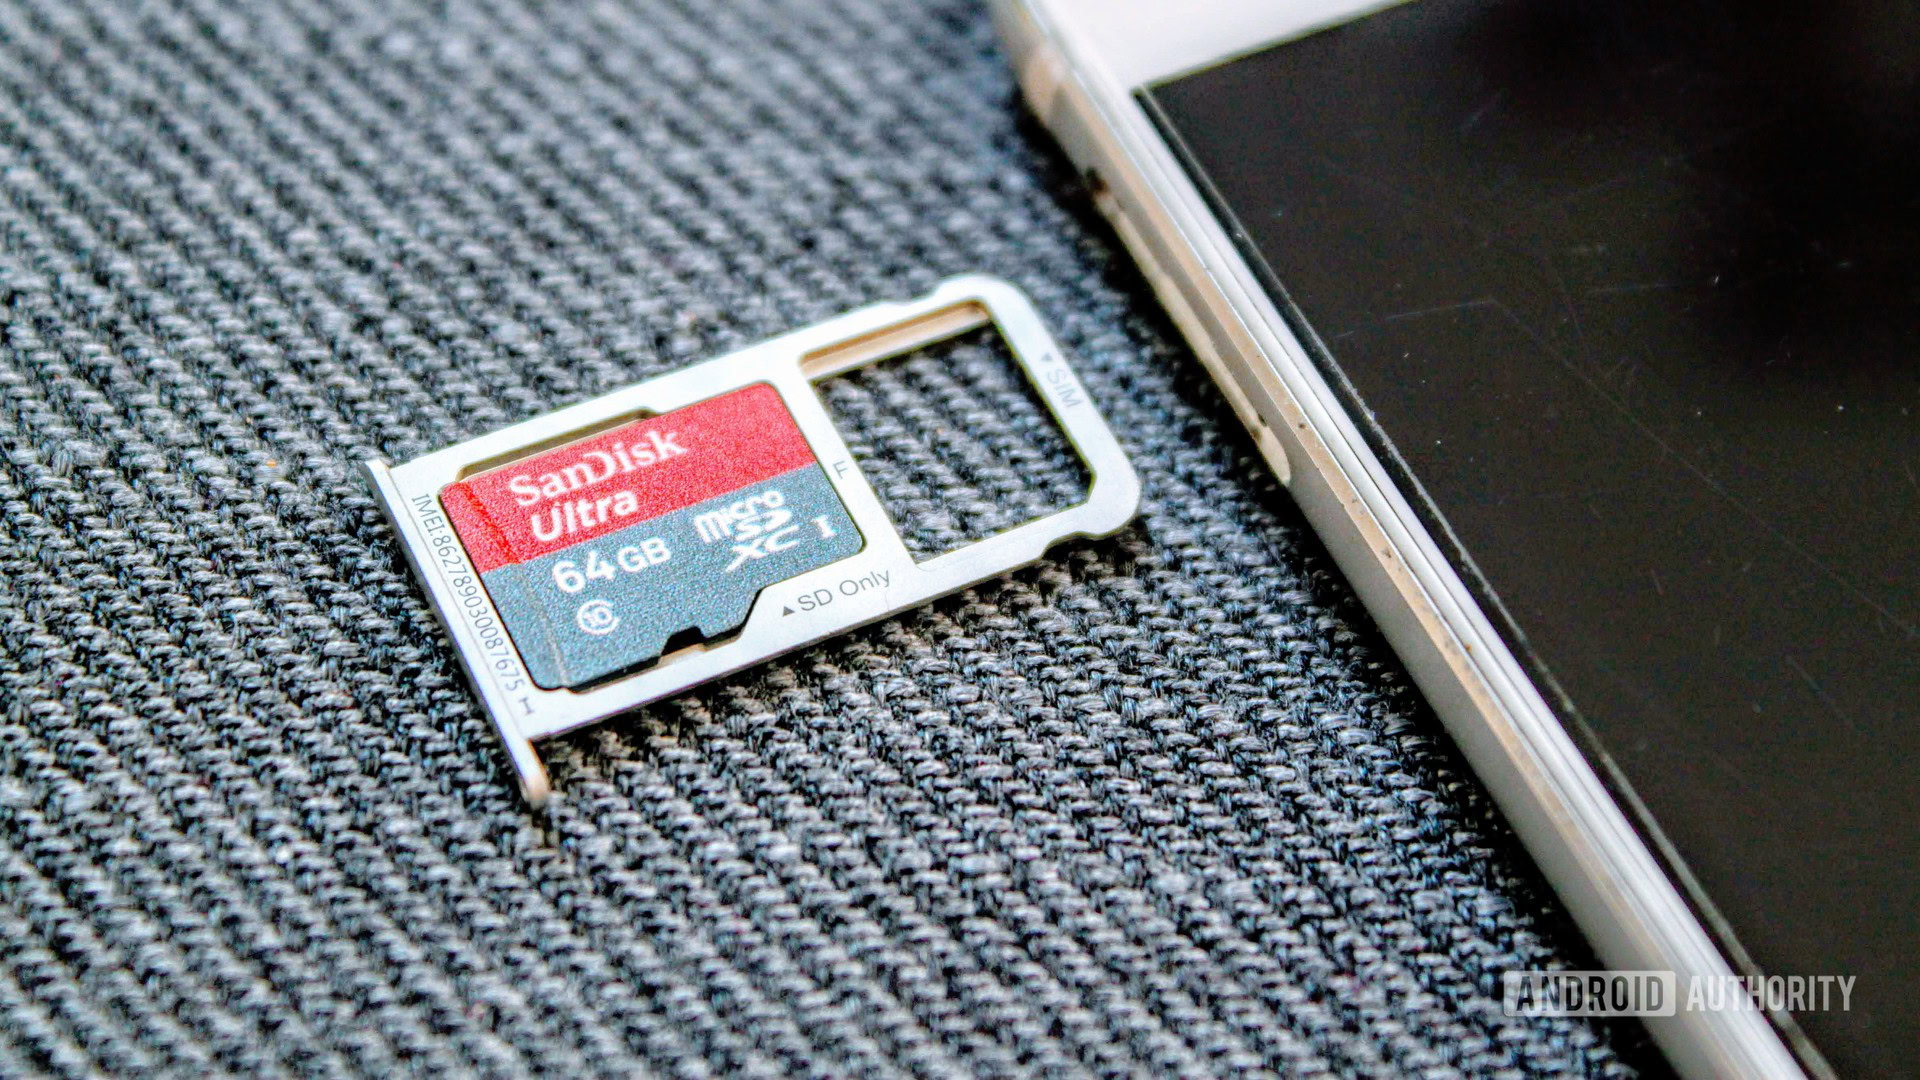 What is Nano Memory and where is it headed? - Android Authority